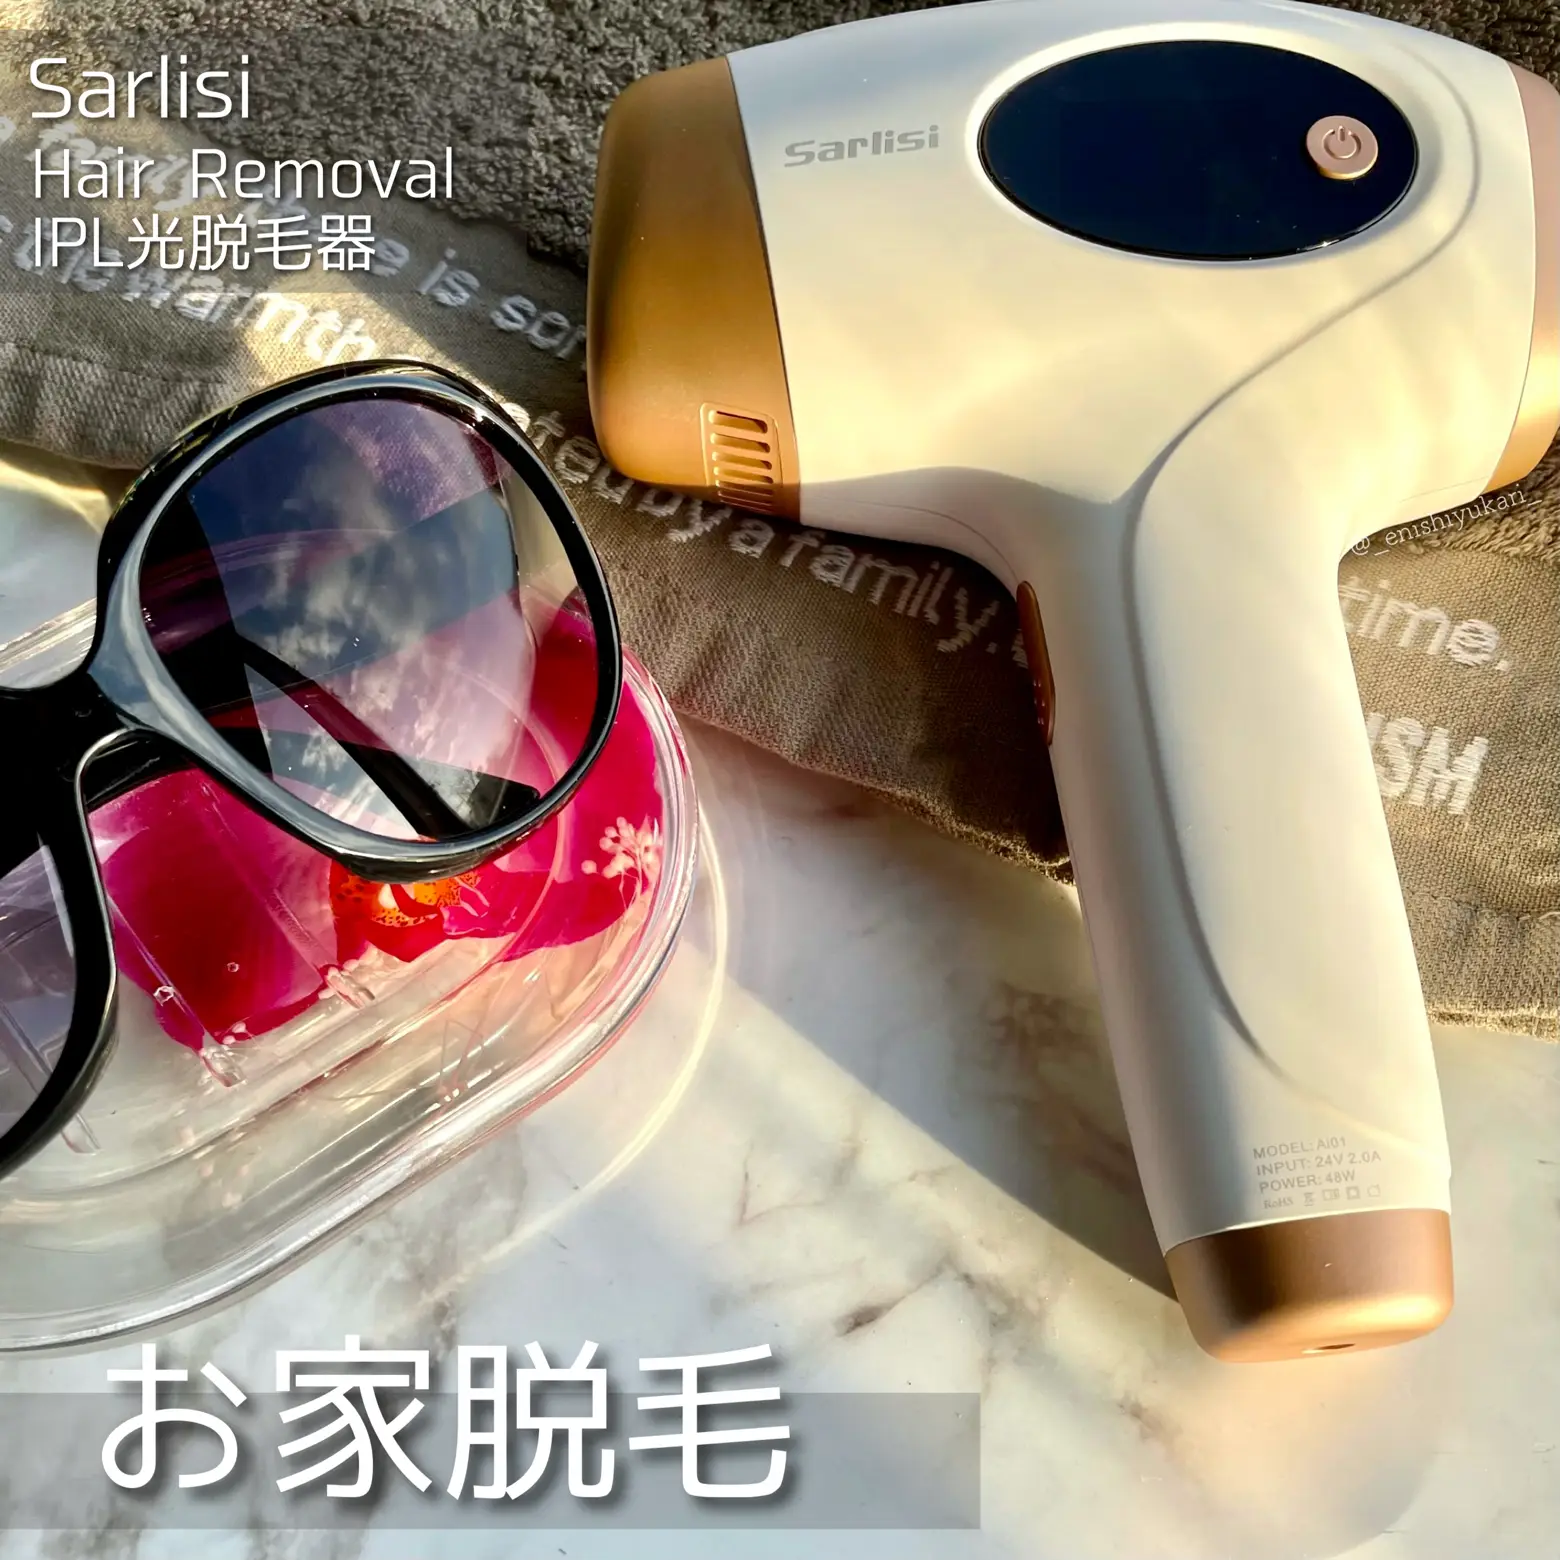 Winter care beauty with light hair removal device | Gallery posted